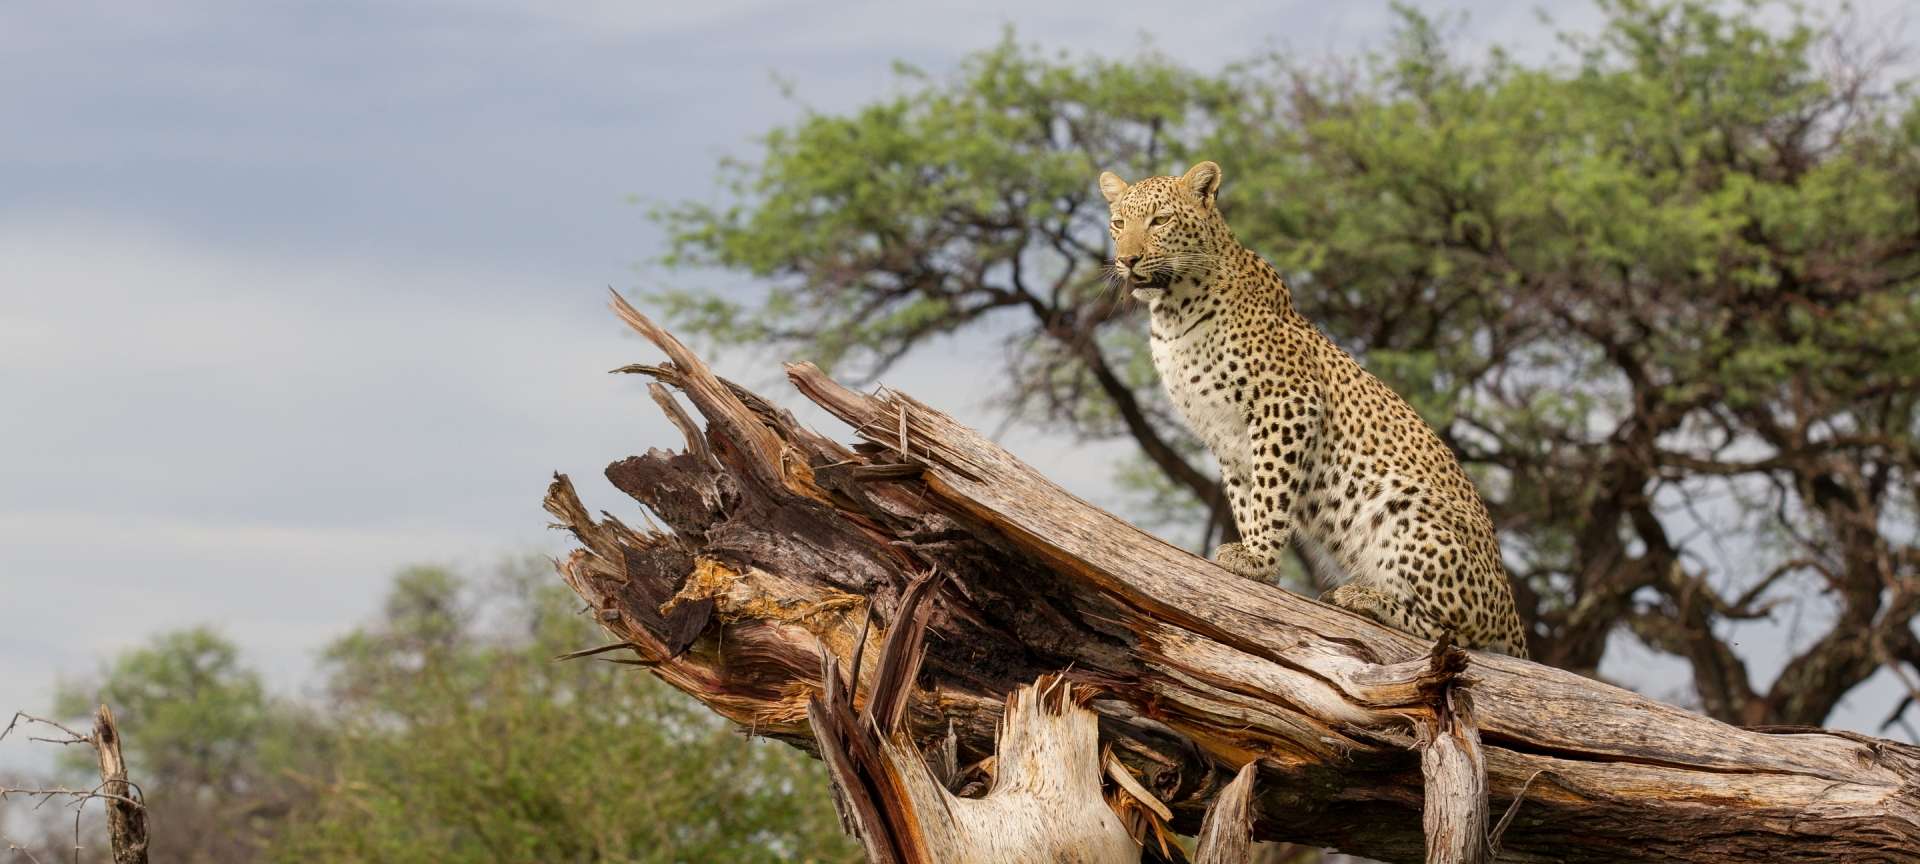 Leopard are elusive and not easily sighted